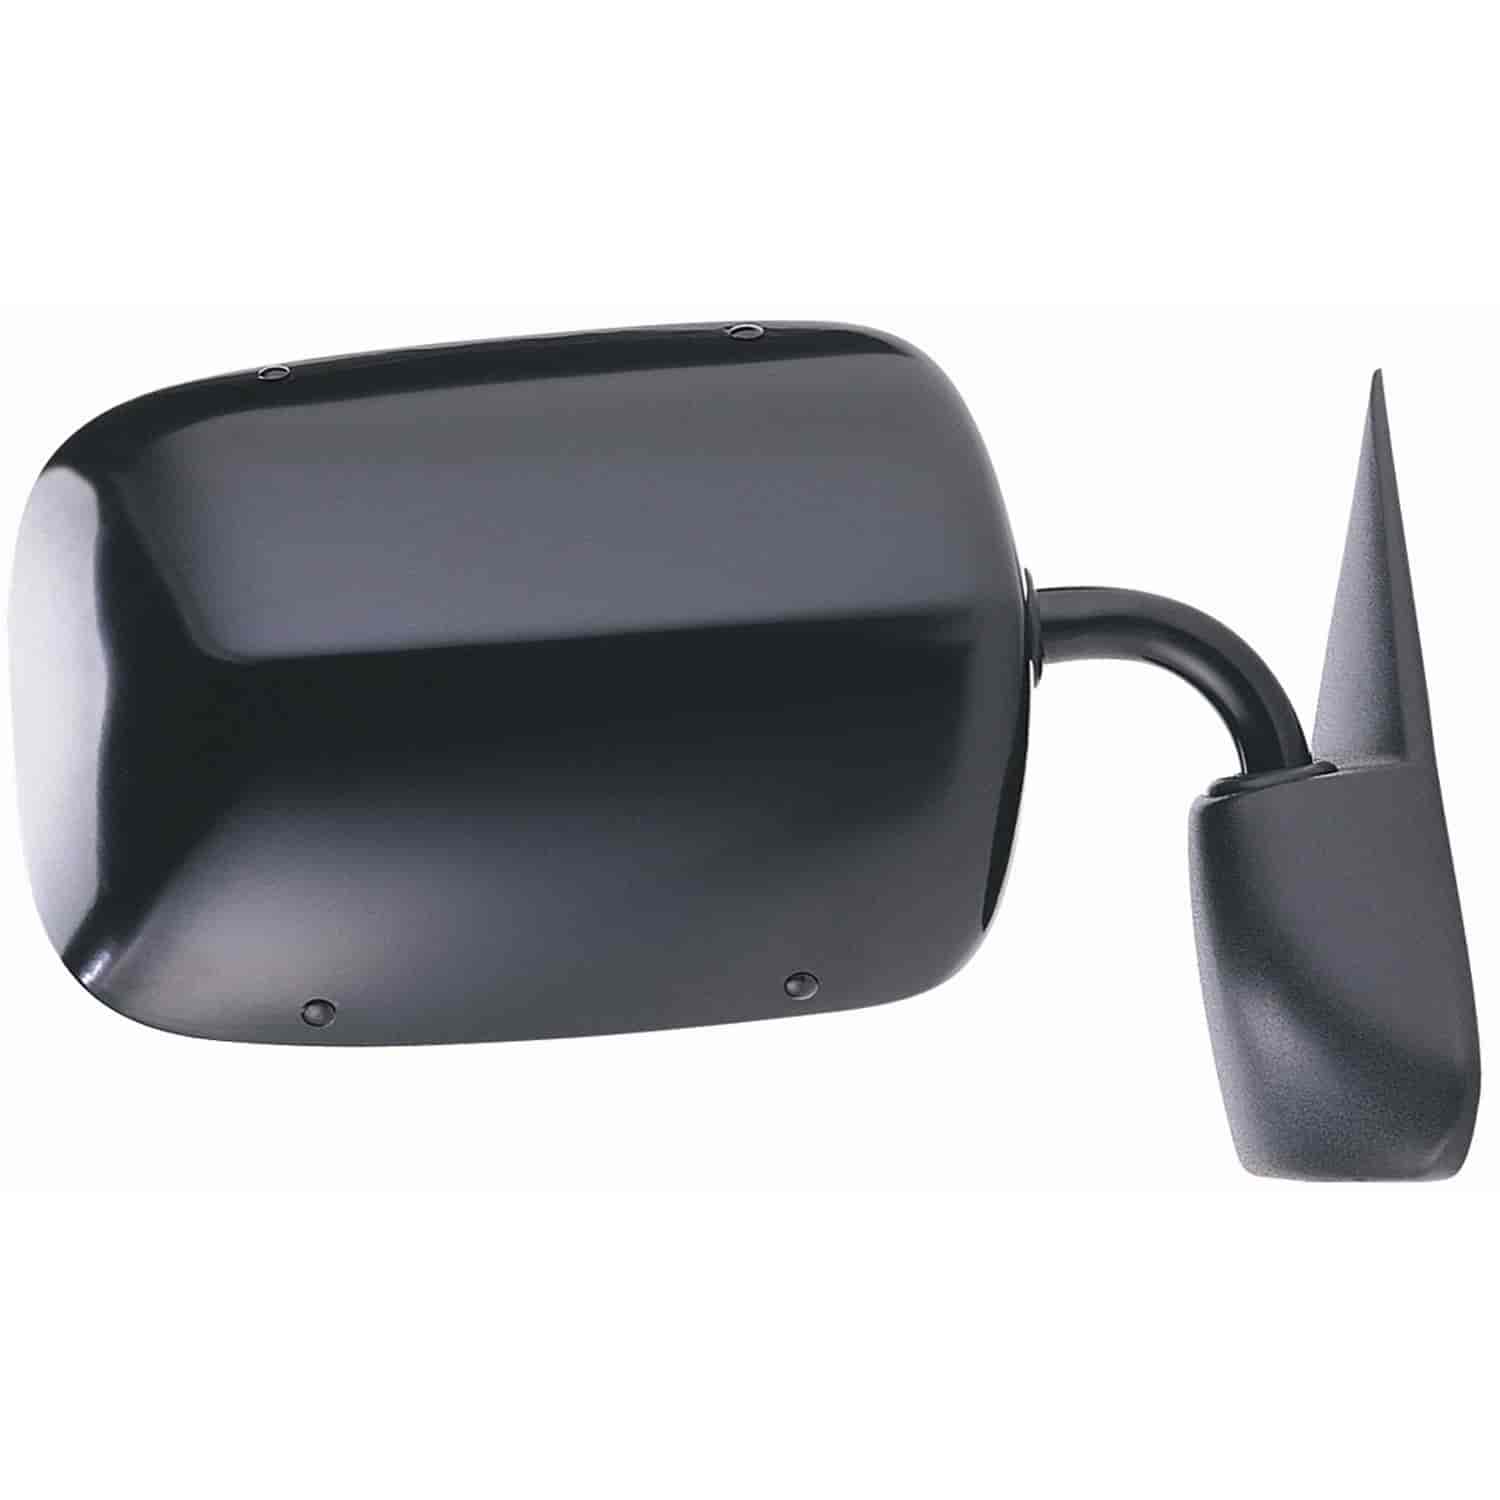 OEM Style Replacement mirror for 94-97 Dodge Pick-Up